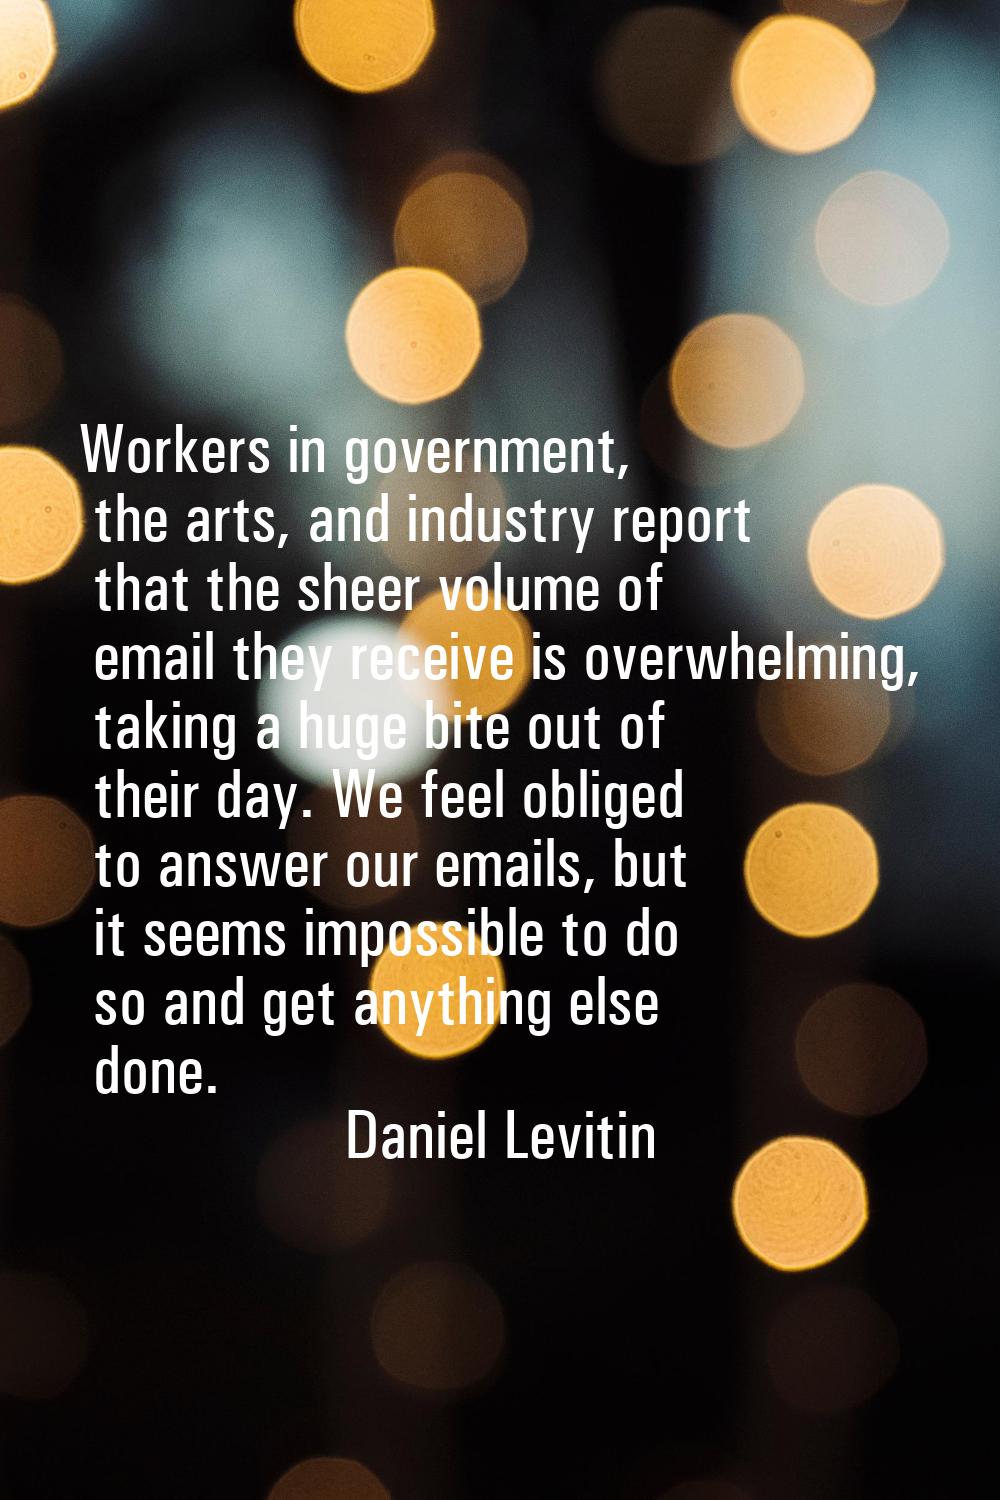 Workers in government, the arts, and industry report that the sheer volume of email they receive is